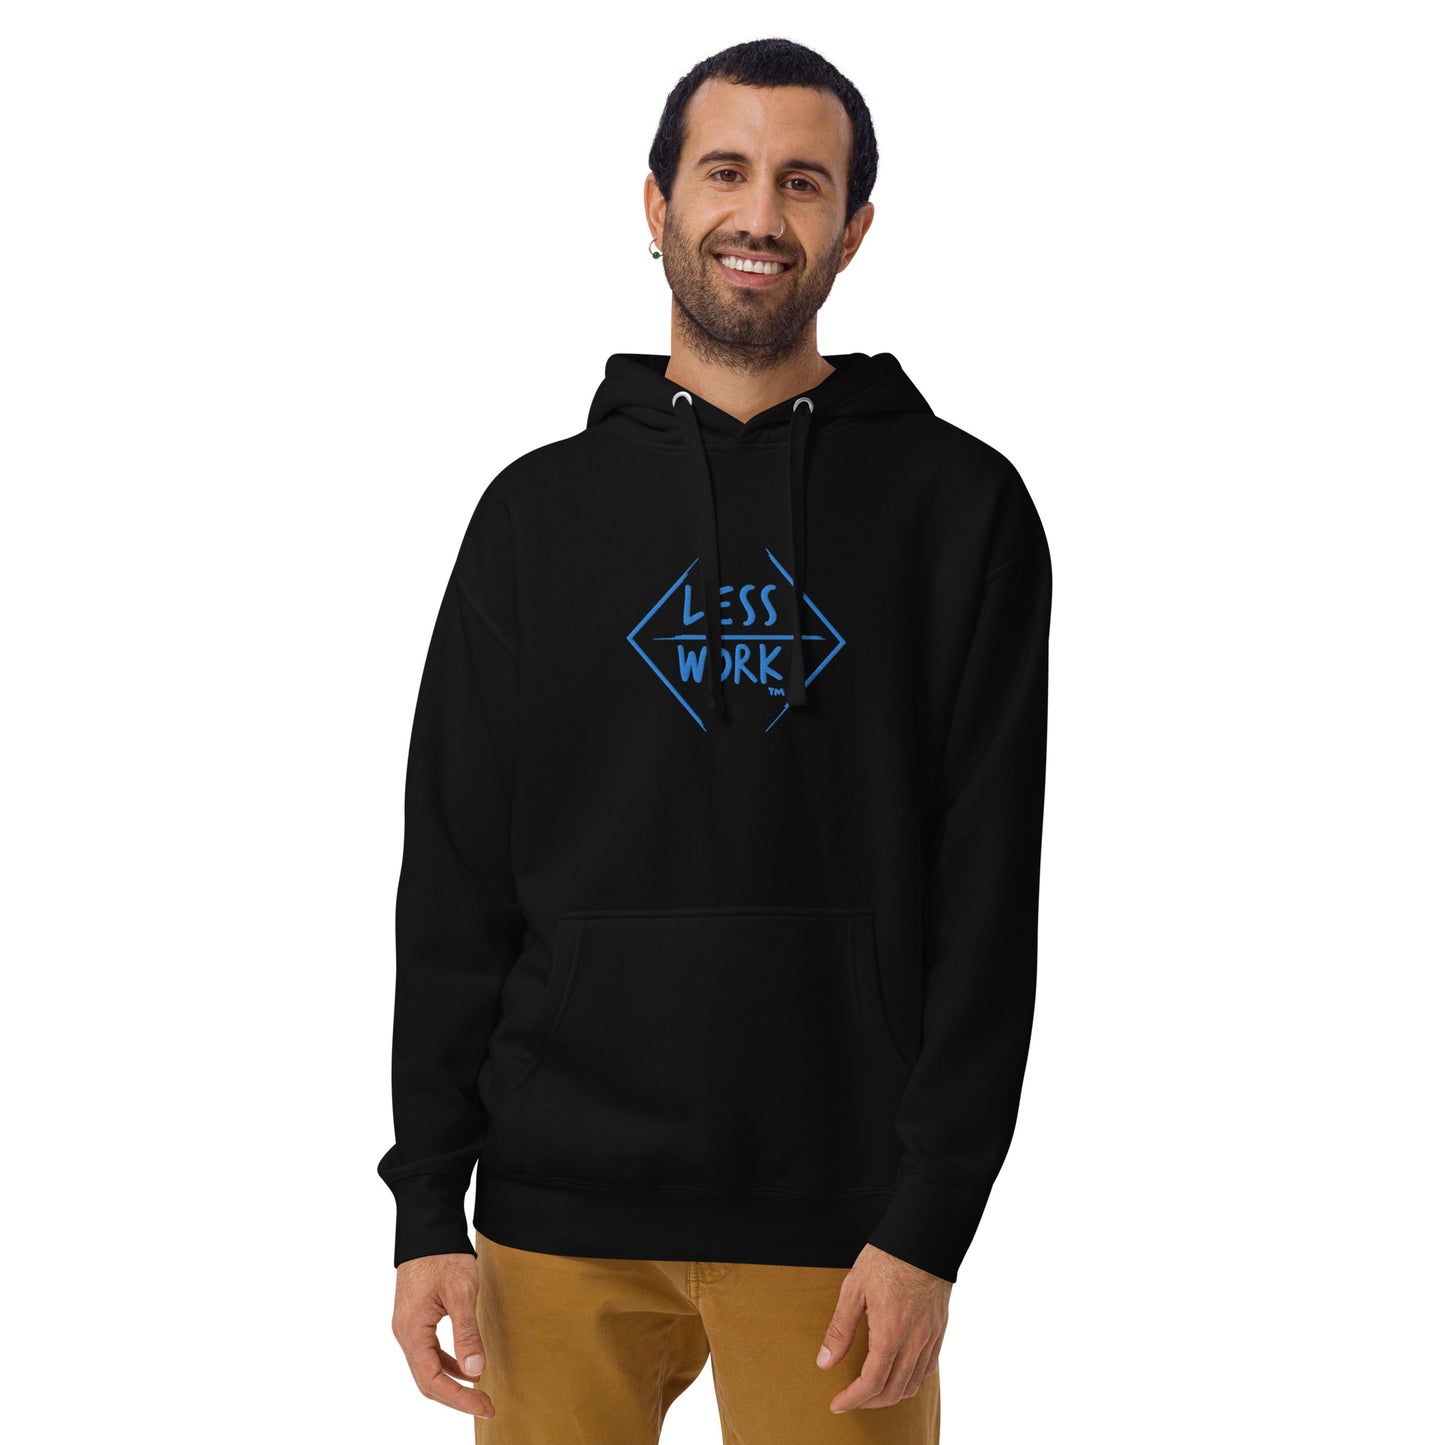 Less Work™ Roadmap of Life Embroidered Unisex Hoodie